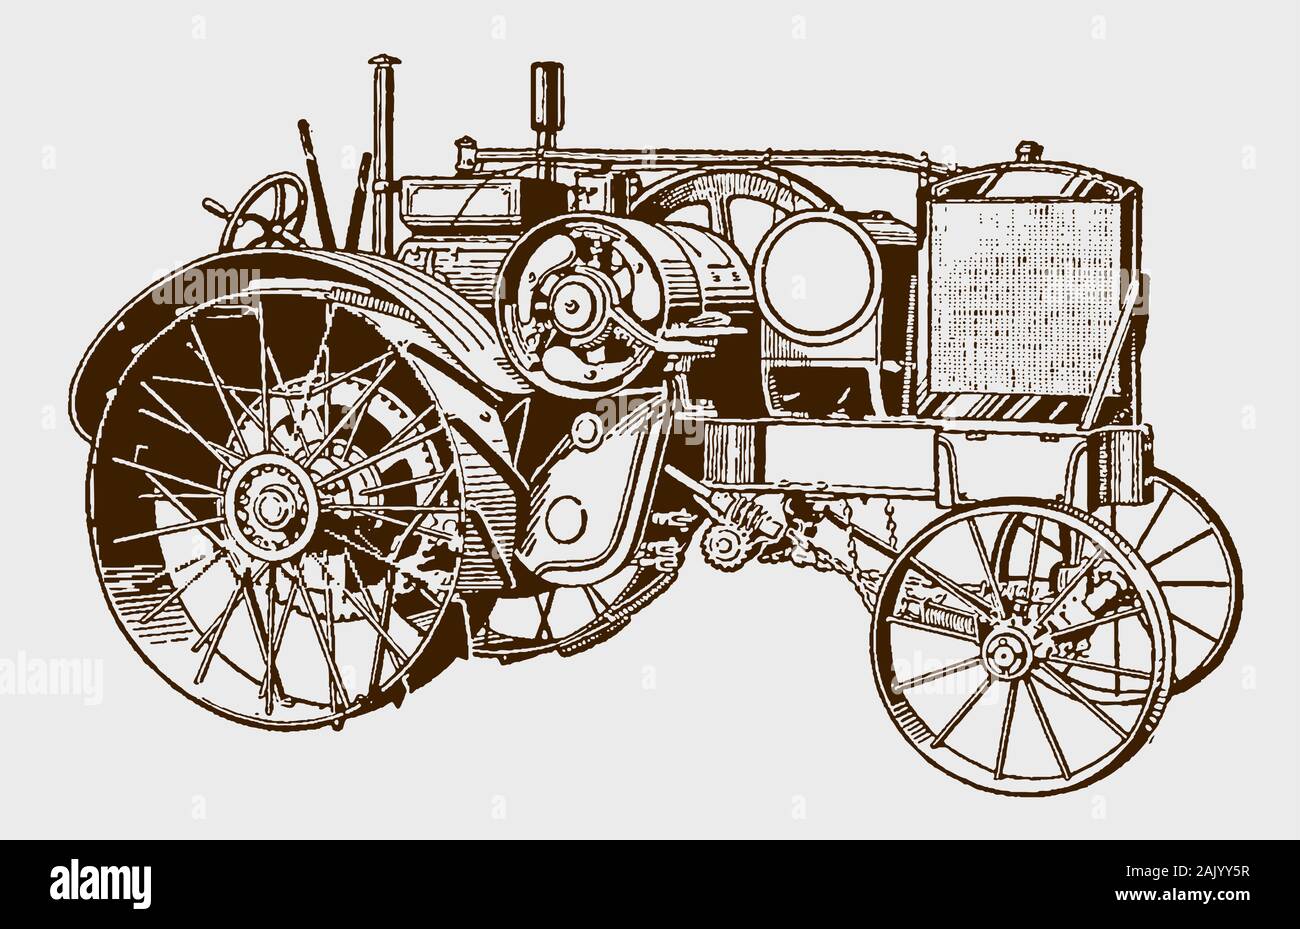 Historical kerosene tractor. Illustration after an engraving from the early 20th century Stock Vector